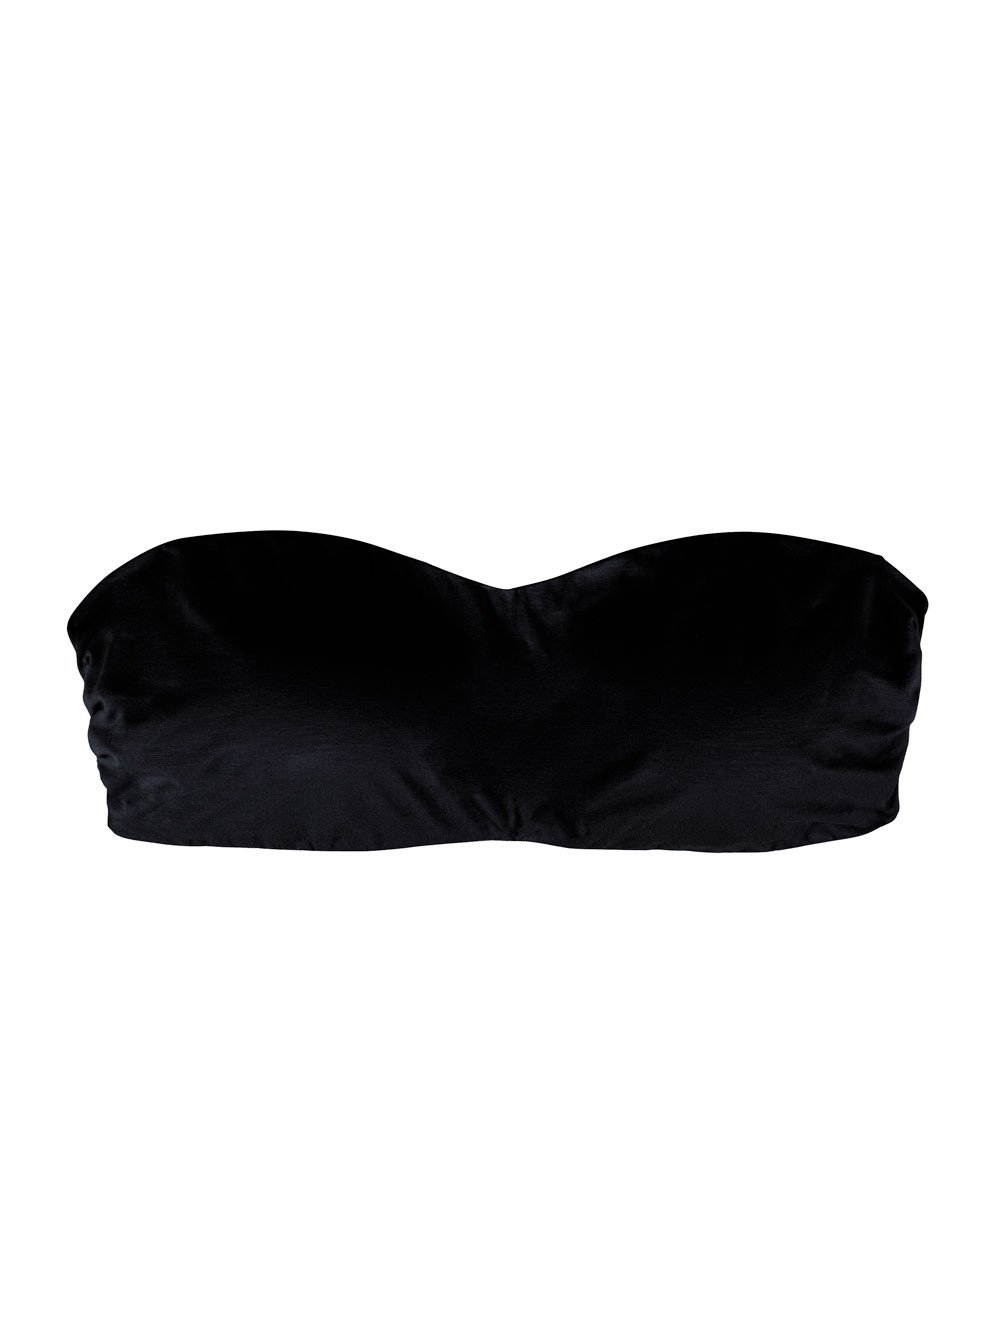 How To Wear This Ultra-Versatile Bandeau